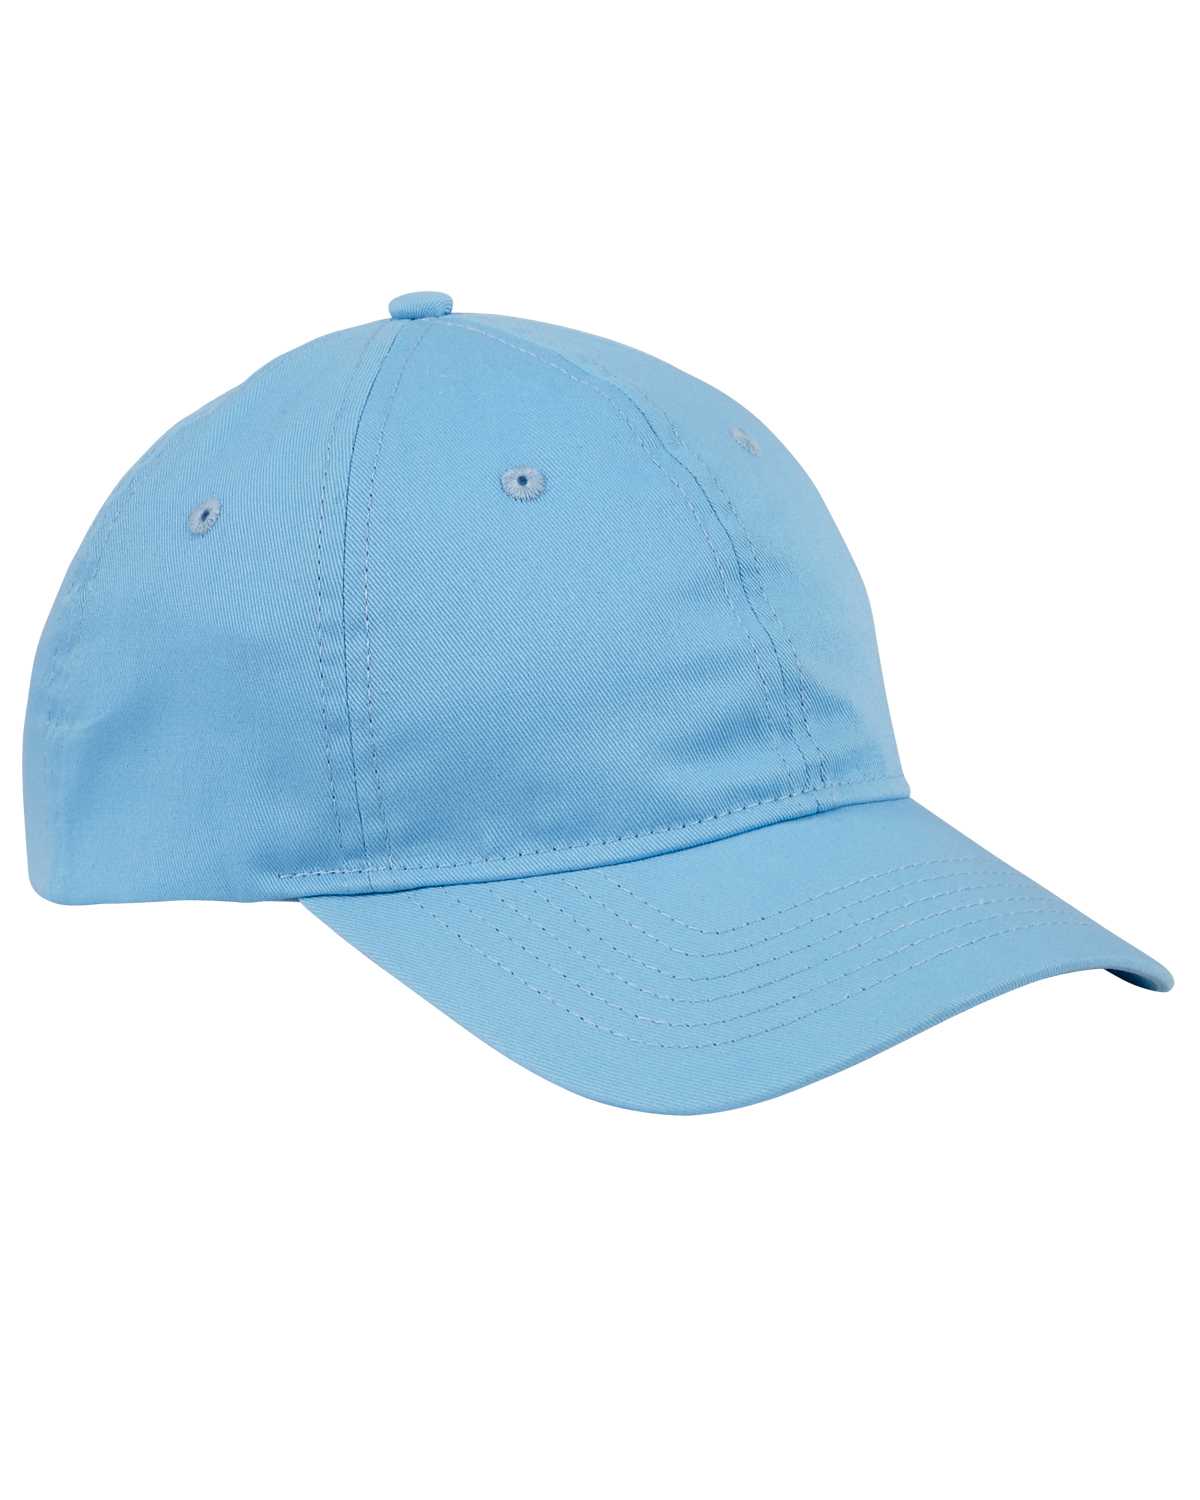 Big Accessories BX880 6-Panel Twill Unstructured Cap | ApparelChoice.com